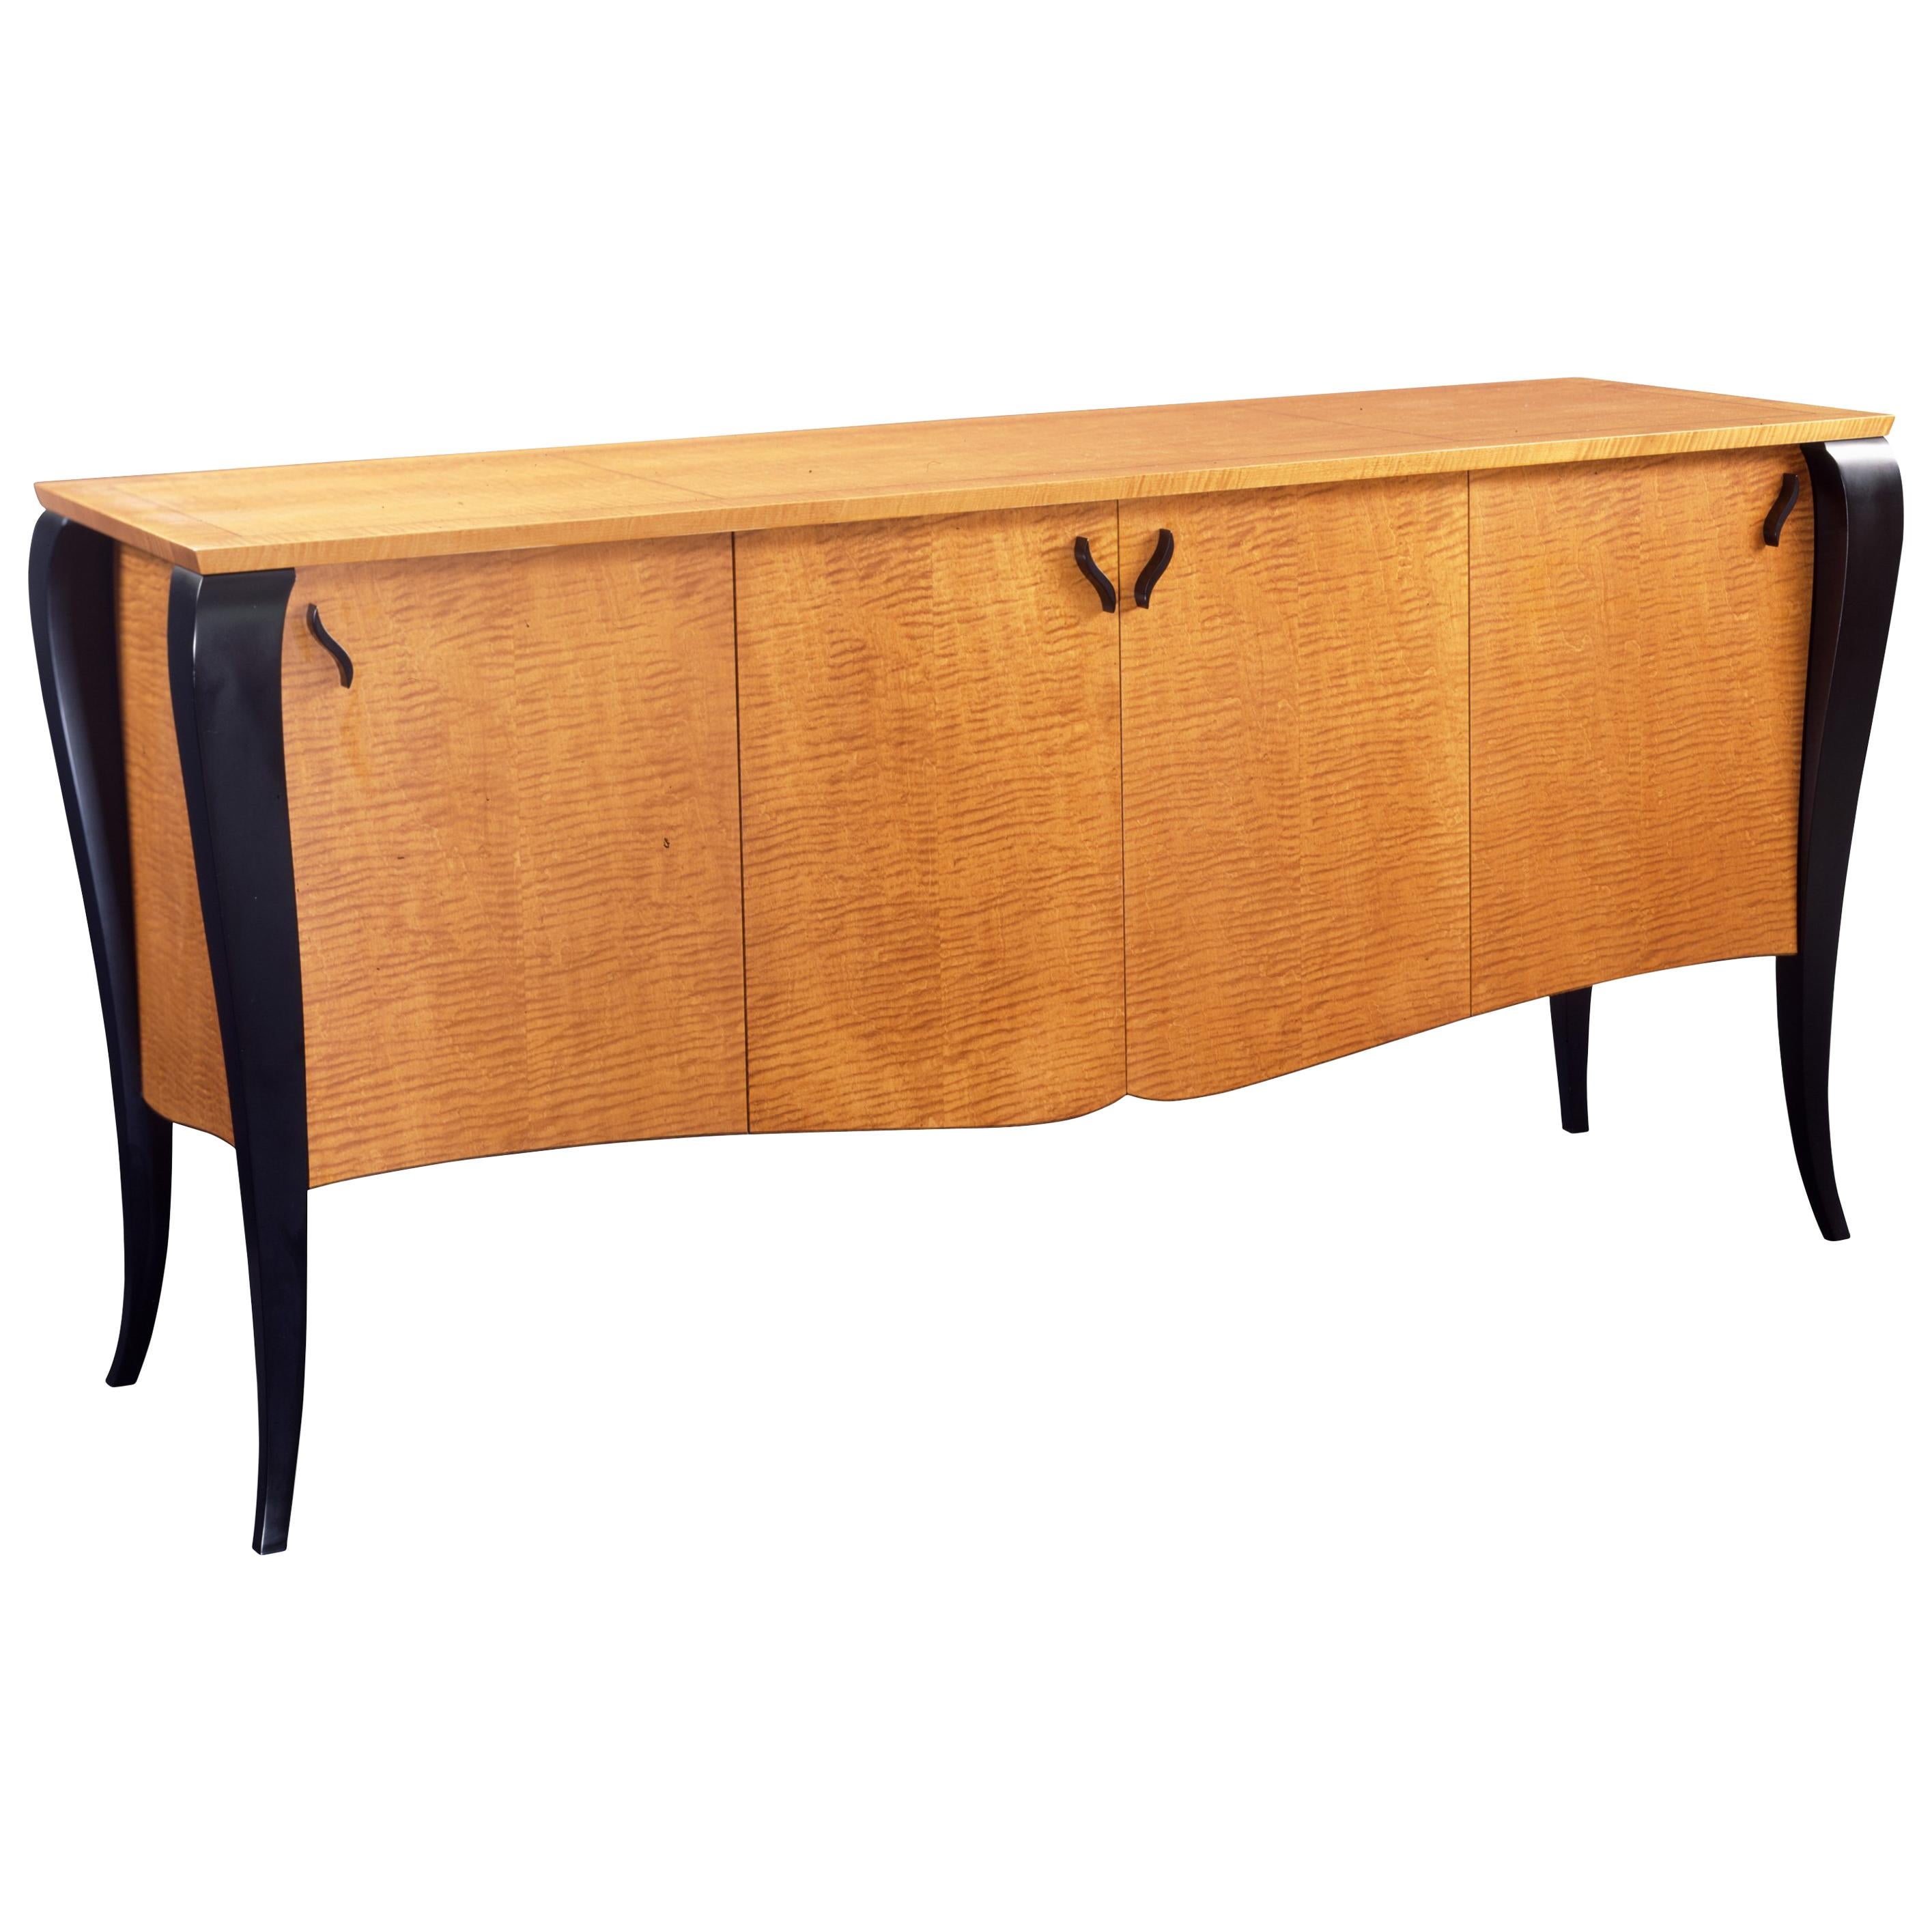 Gazelle Sideboard, Handcrafted Contemporary Credenza with Art Deco Style For Sale